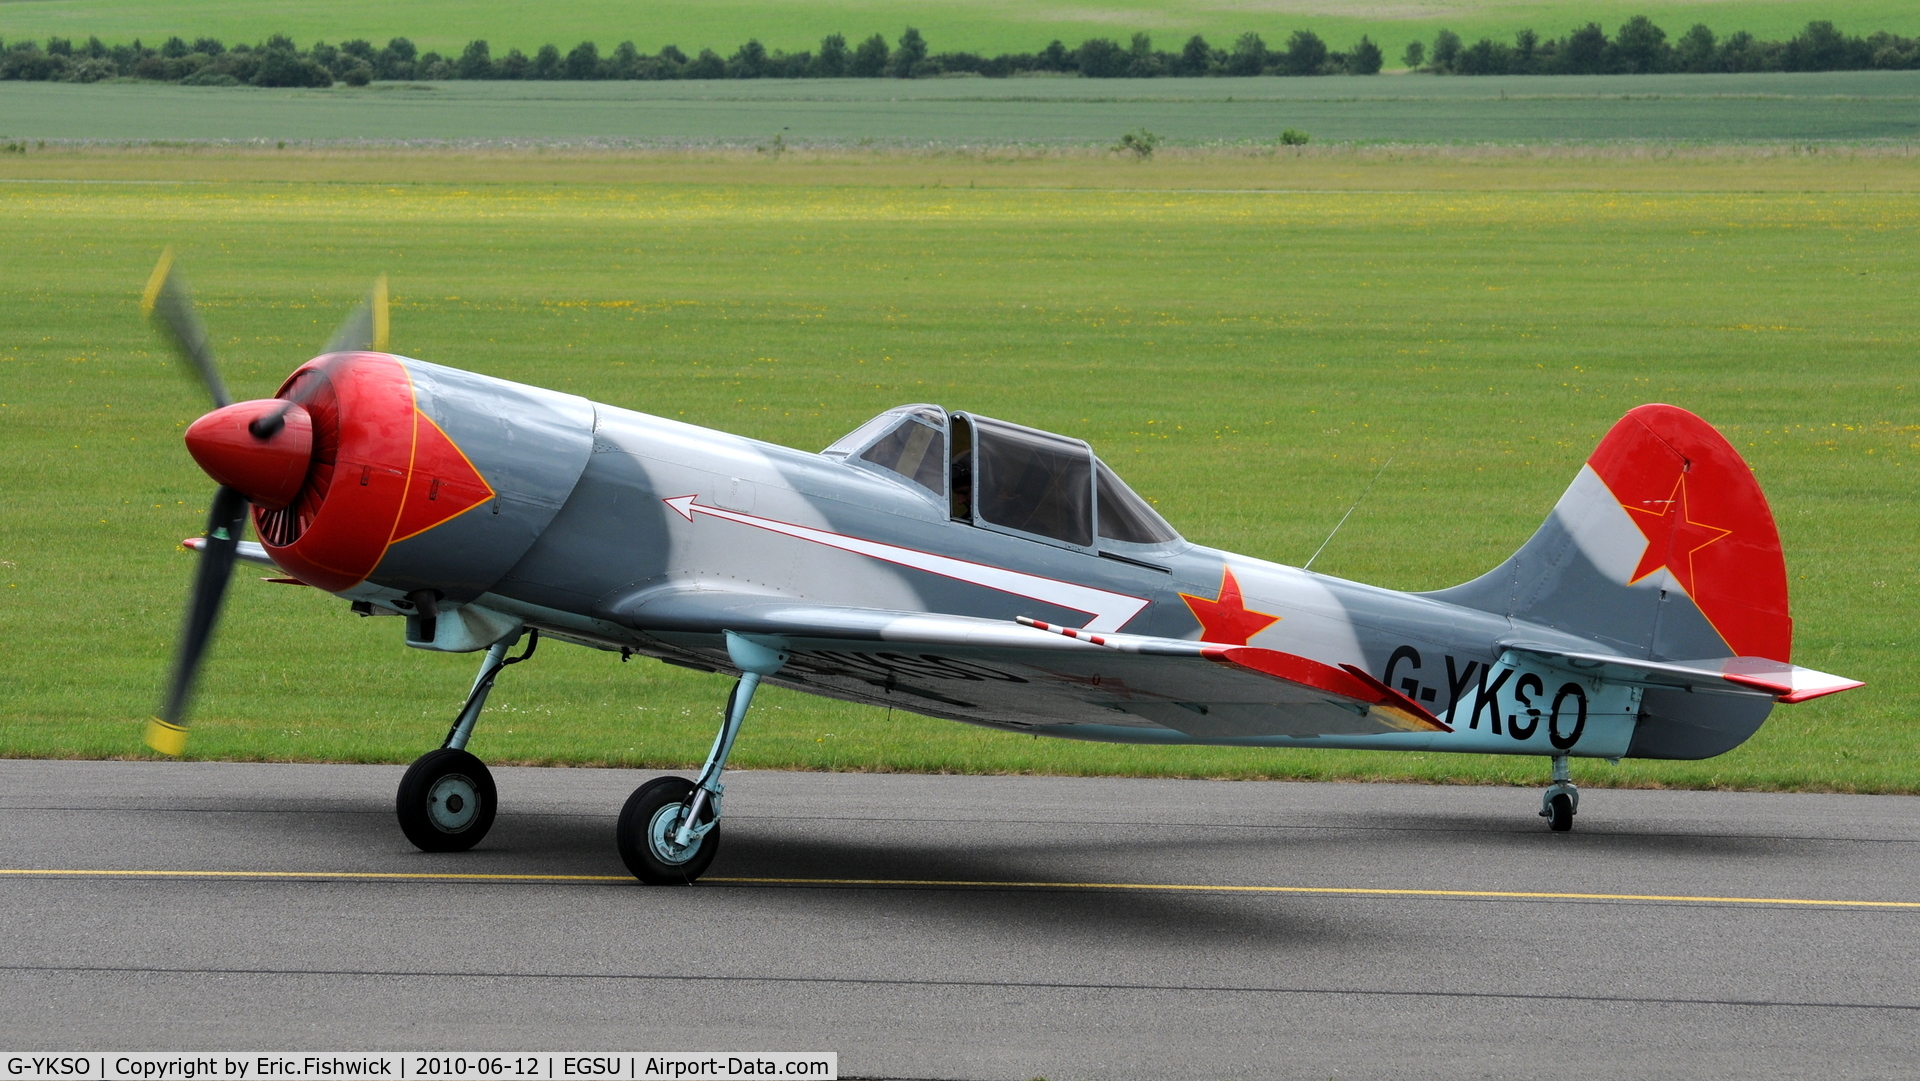 G-YKSO, 1979 Yakovlev Yak-50 C/N 791506, 1. G-YKSO at The Duxford Trophy Aerobatic Contest, June 2010